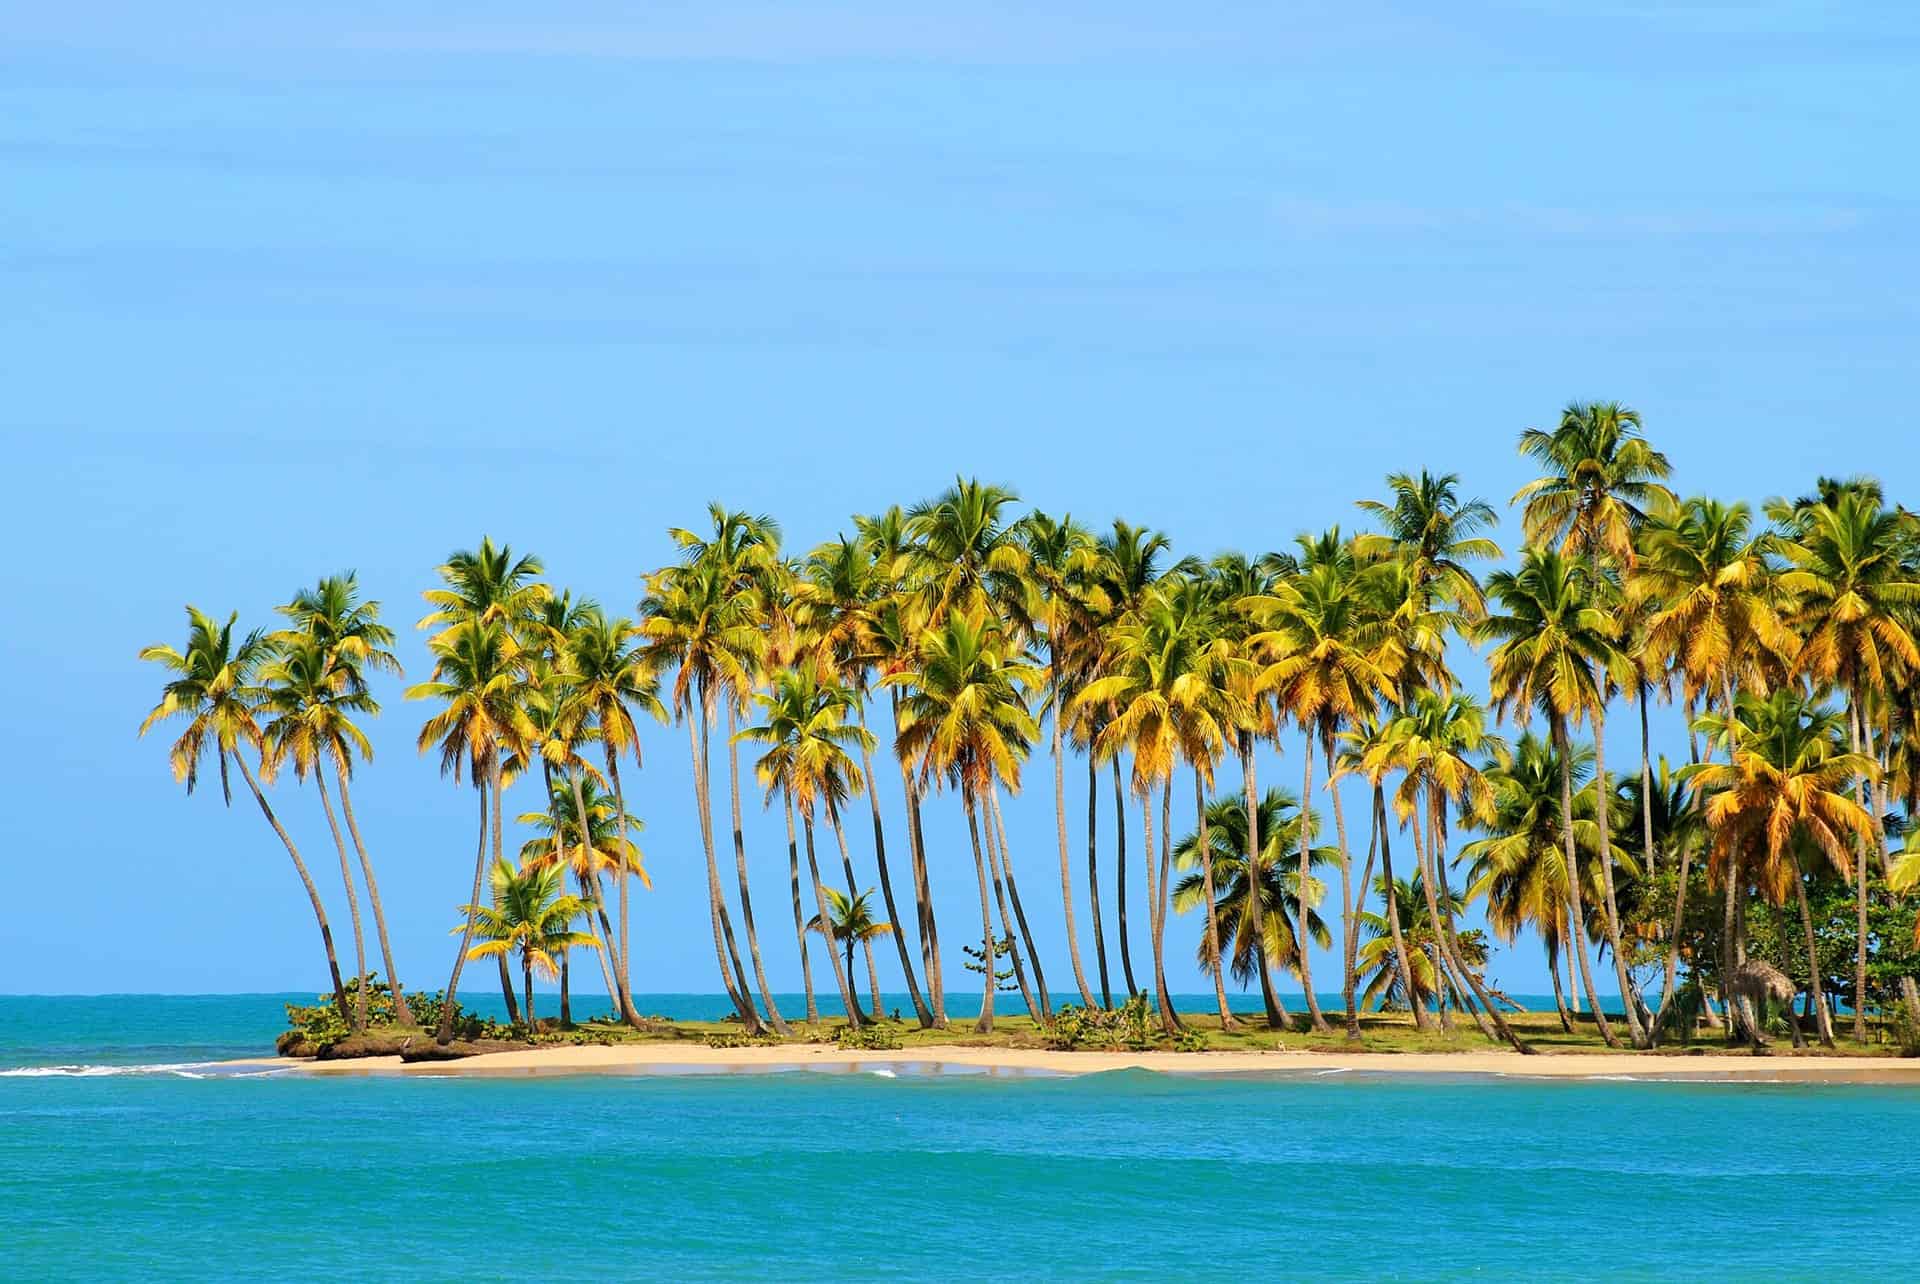 Palms at the Playa Esmeralda in the Dominican Republic